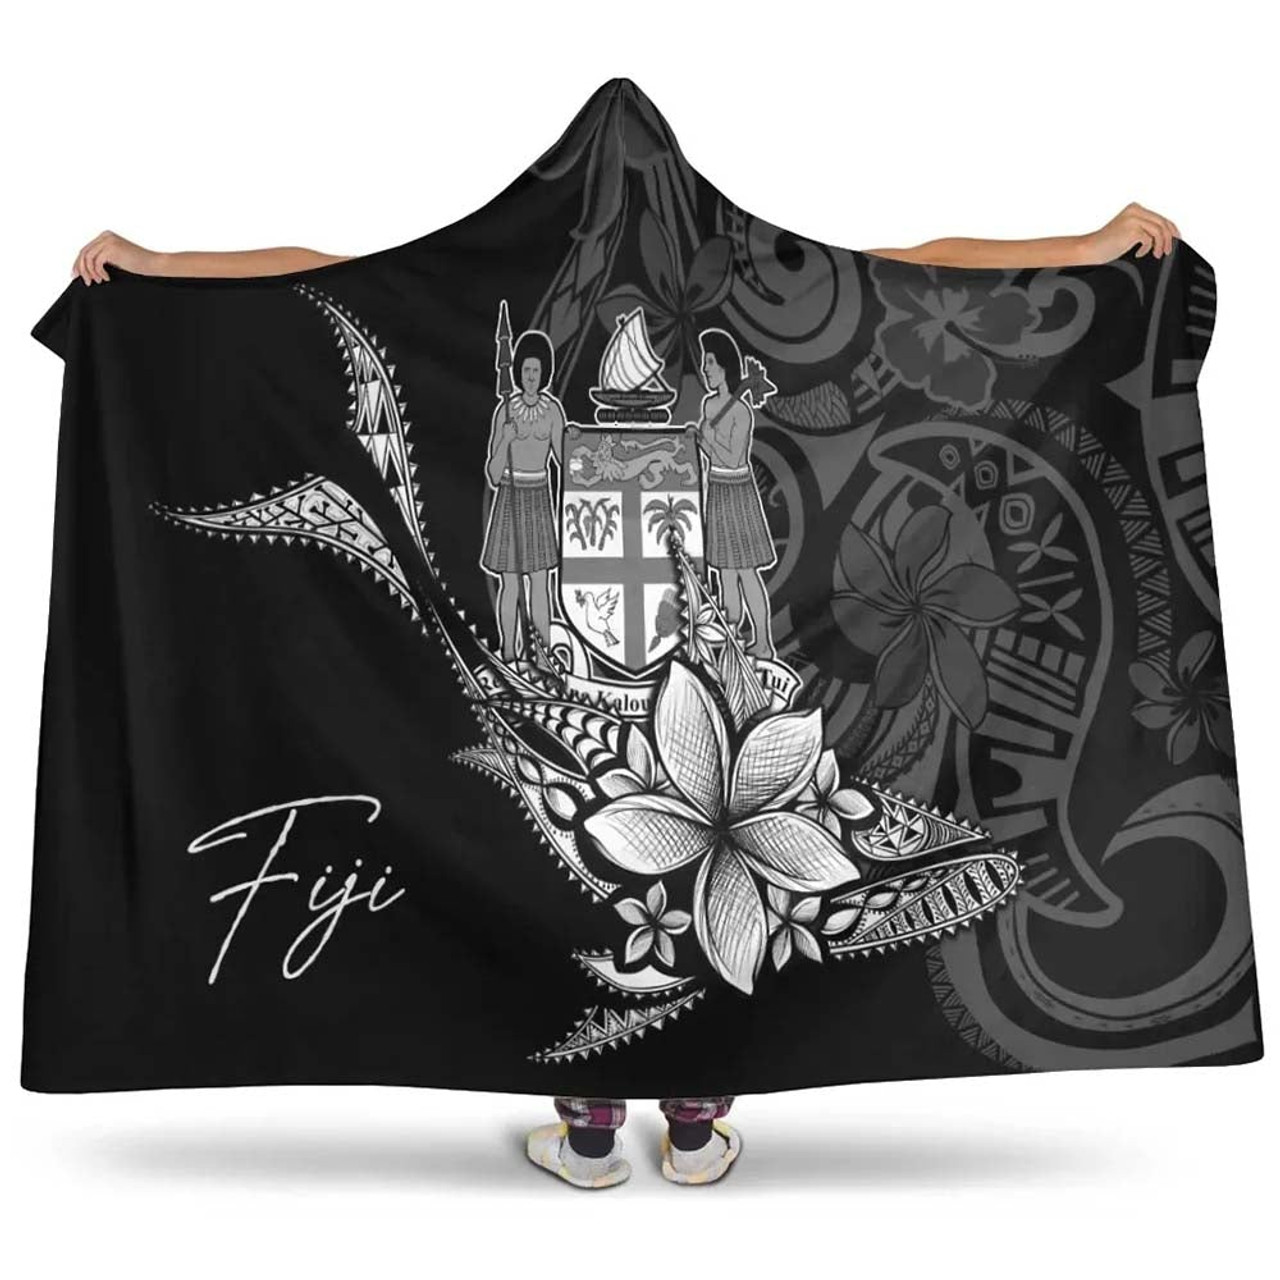 Fiji Hooded Blanket - Fish With Plumeria Flowers Style 1